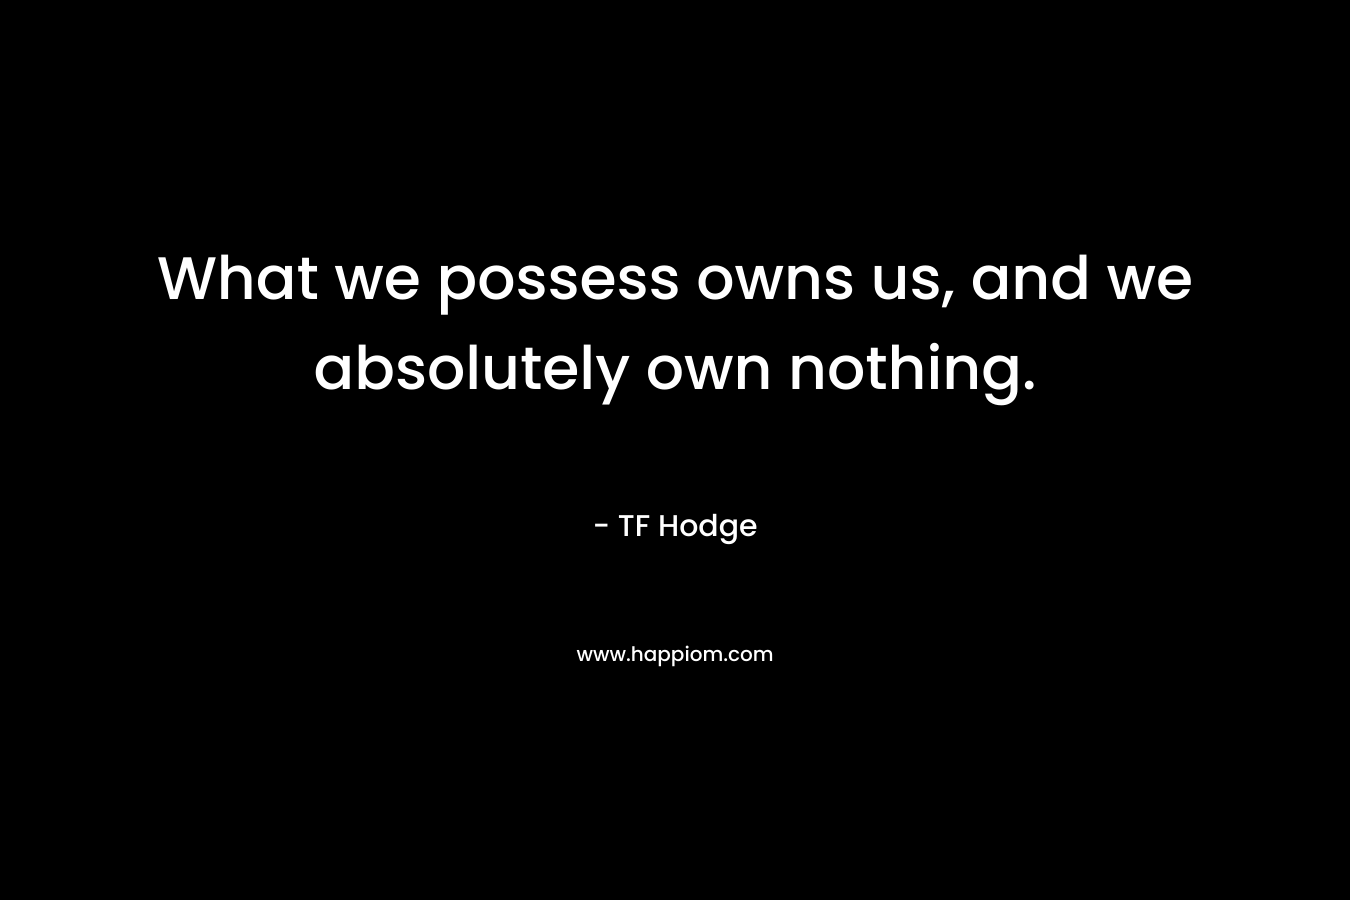 What we possess owns us, and we absolutely own nothing.